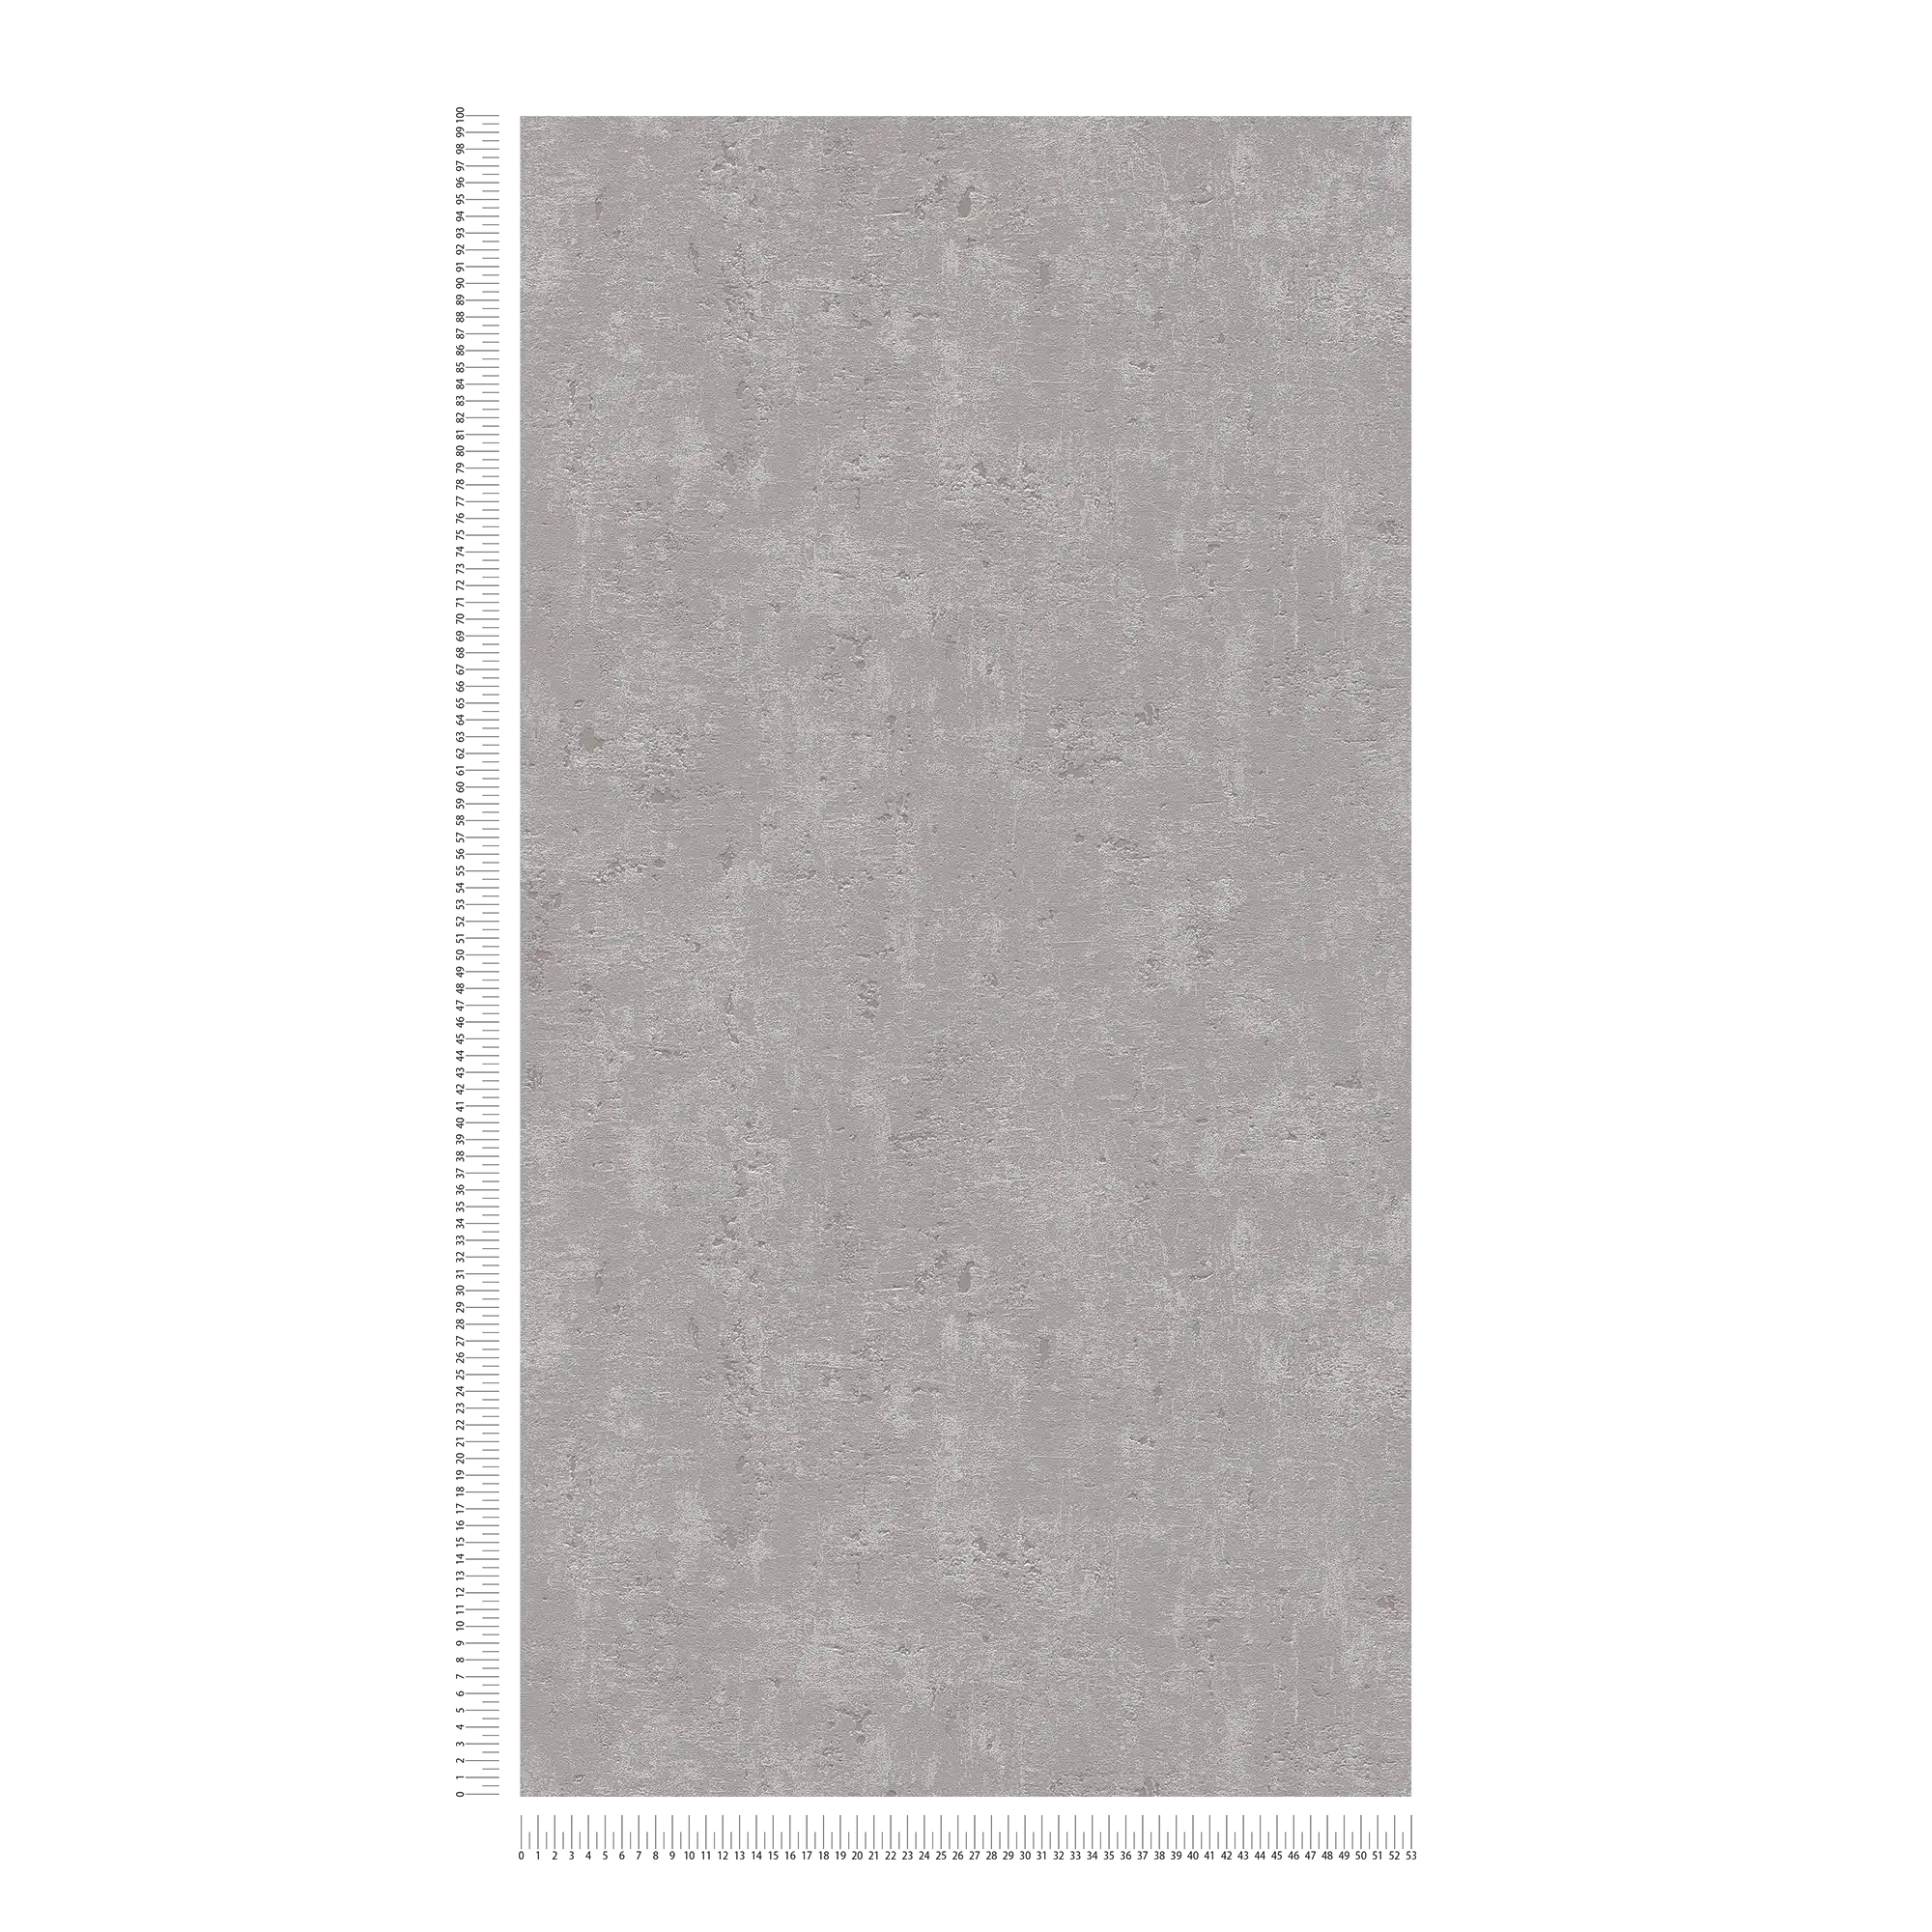             Concrete look wallpaper rustic grey with surface texture
        